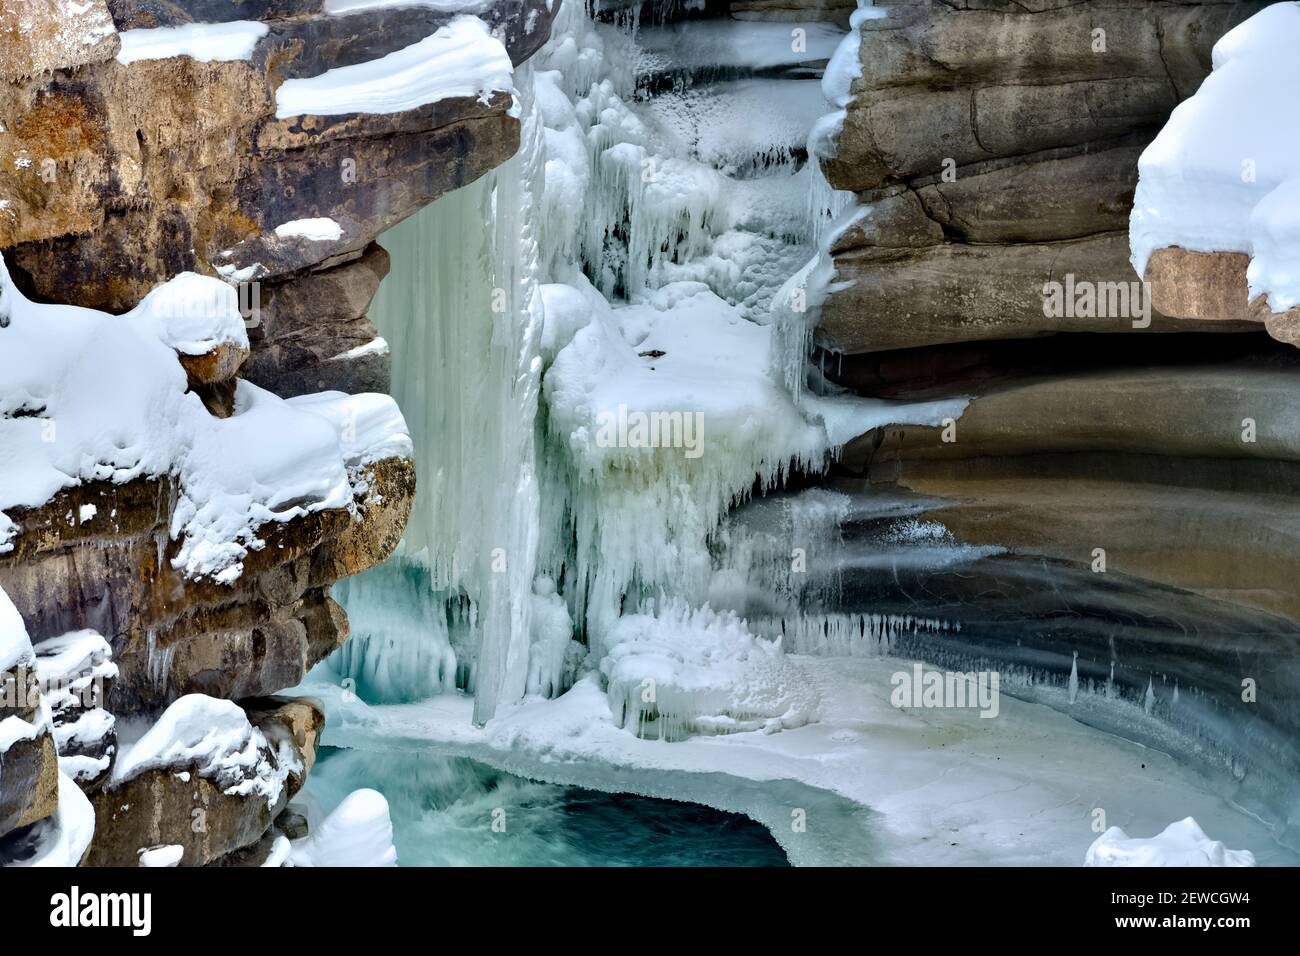 A horizontal image of The Athabasca falls in winter with frozen ice clinging to the rock canyon walls in Jasper National Park in Alberta Canada. Stock Photo